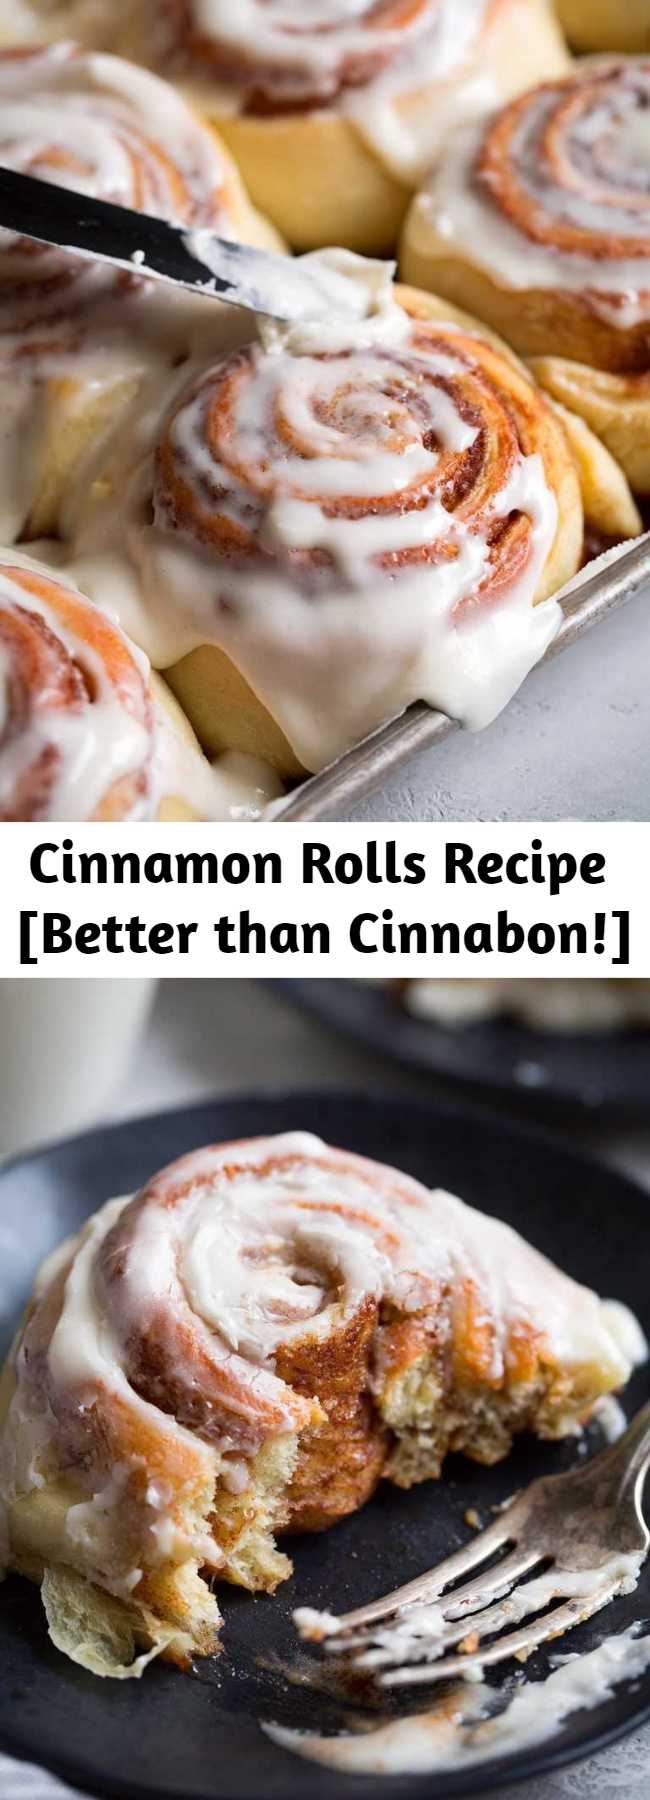 Cinnamon Rolls Recipe [Better than Cinnabon!] - My all time favorite cinnamon rolls! So soft and fluffy, and perfectly chewy with a hint of gooey. Their sweetness is perfectly paired with a hint of buttermilk flavor and a cream cheese icing. And they are jam packed with the best cinnamon flavor! A recipe you won't want to lose. #cinnamonrolls #breakfast #dessert #bake #homemade #dough #diy #rolls